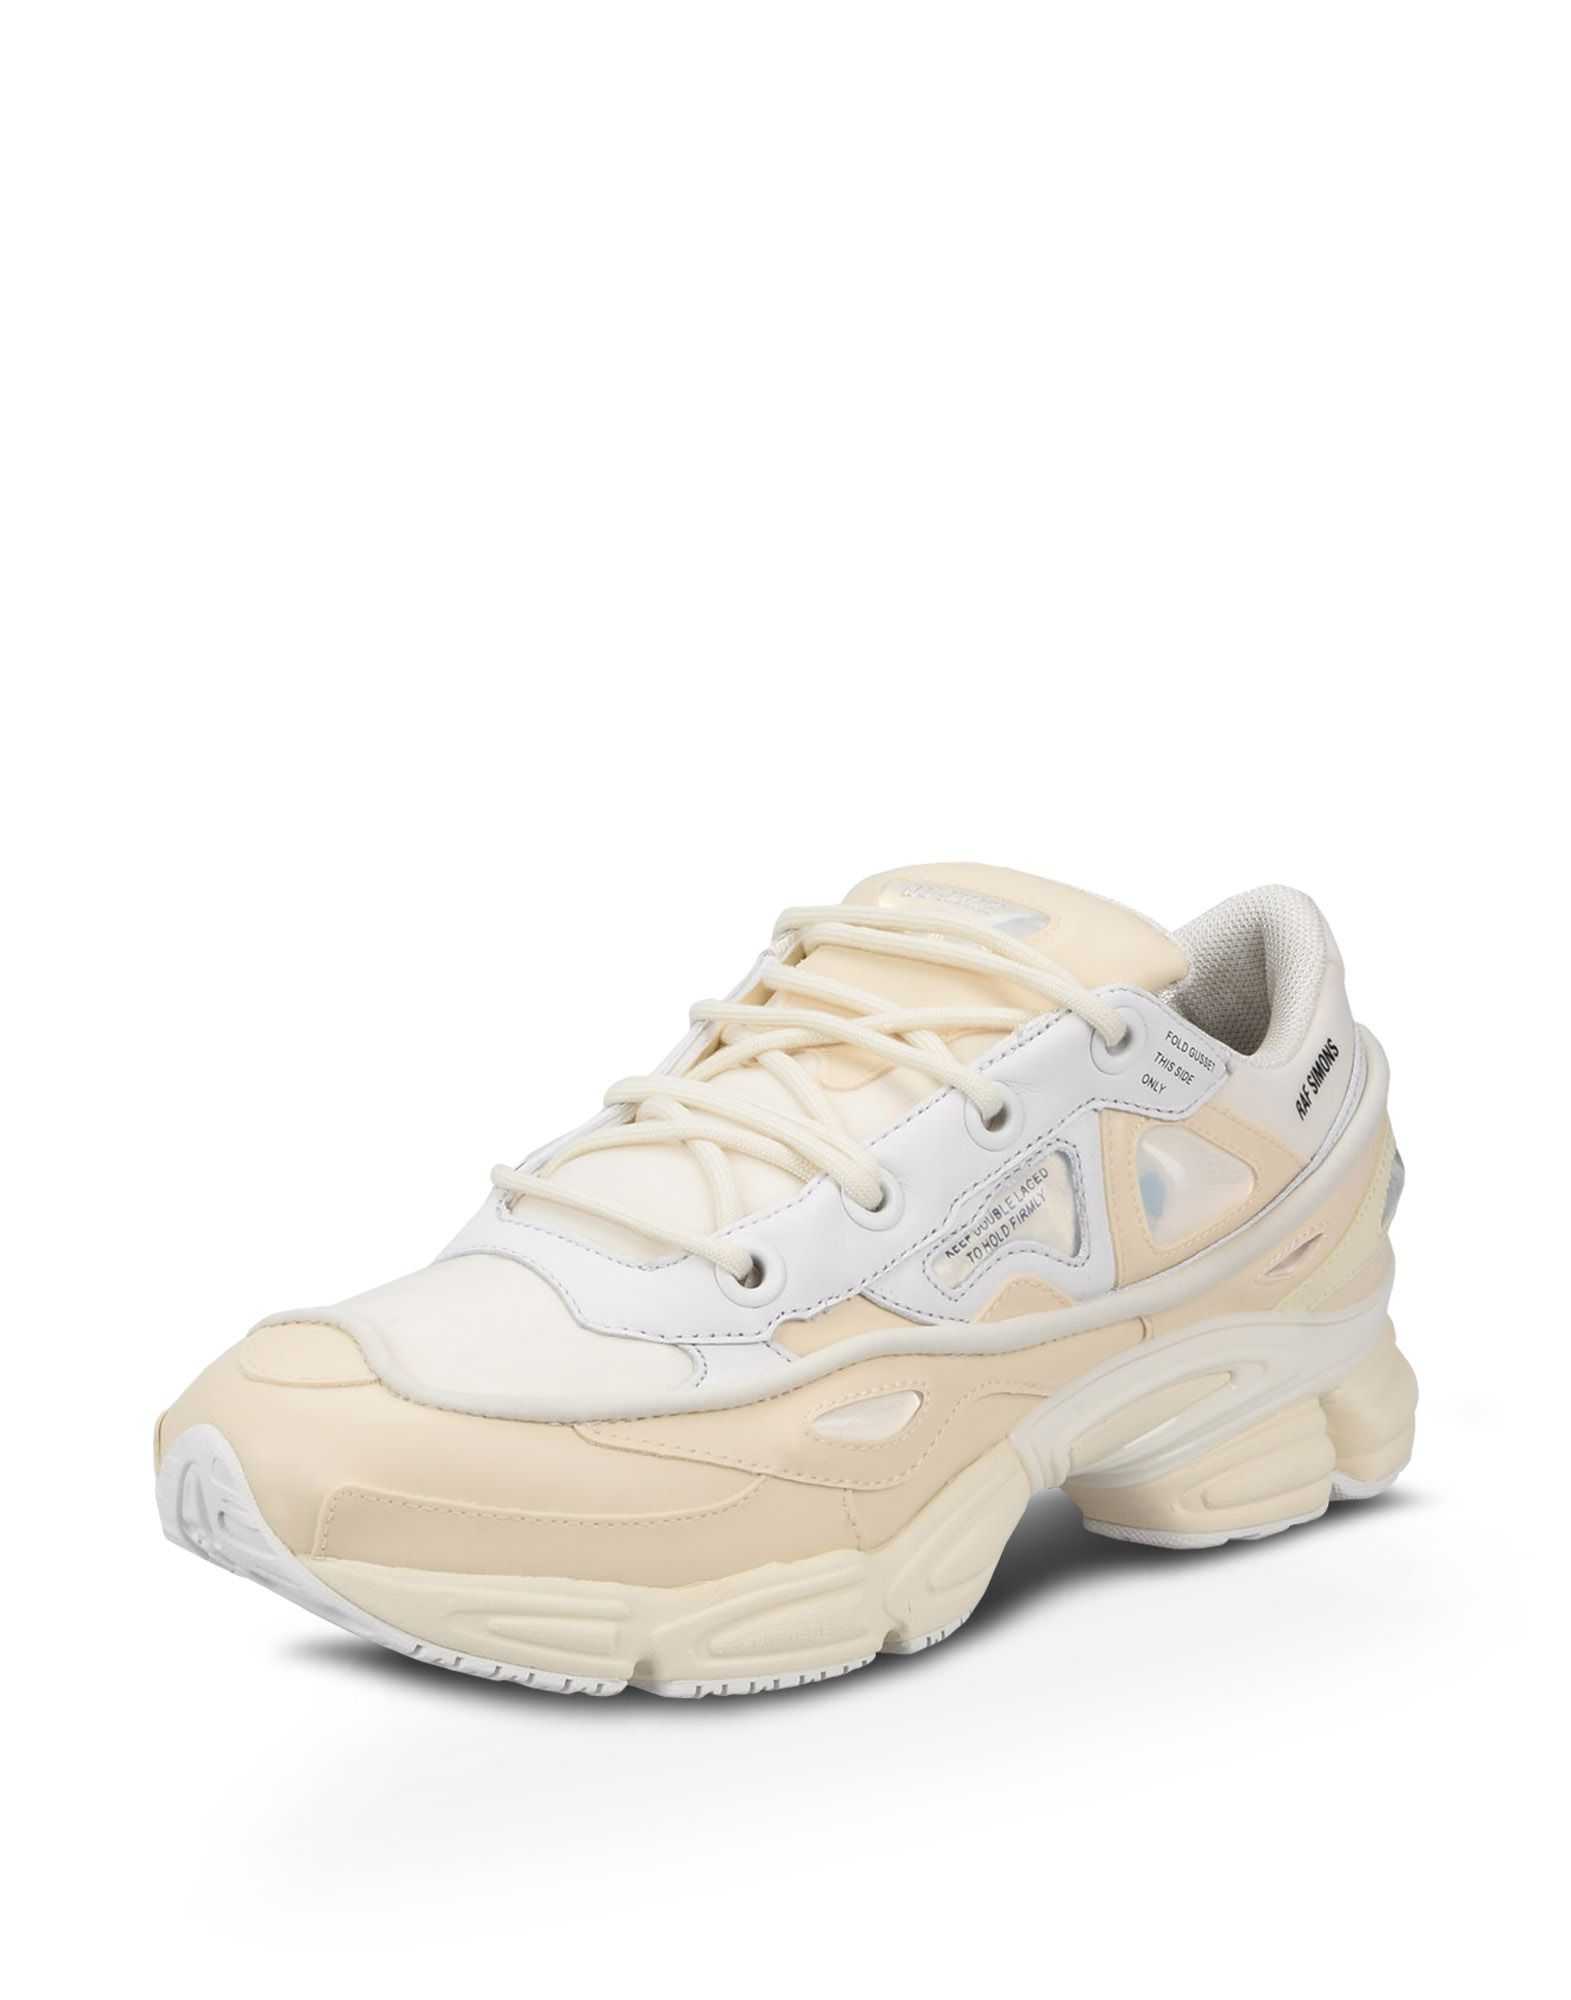 Adidas By RAF SIMONS OZWEEGO BUNNY Sneakers | Adidas Y-3 Official Store